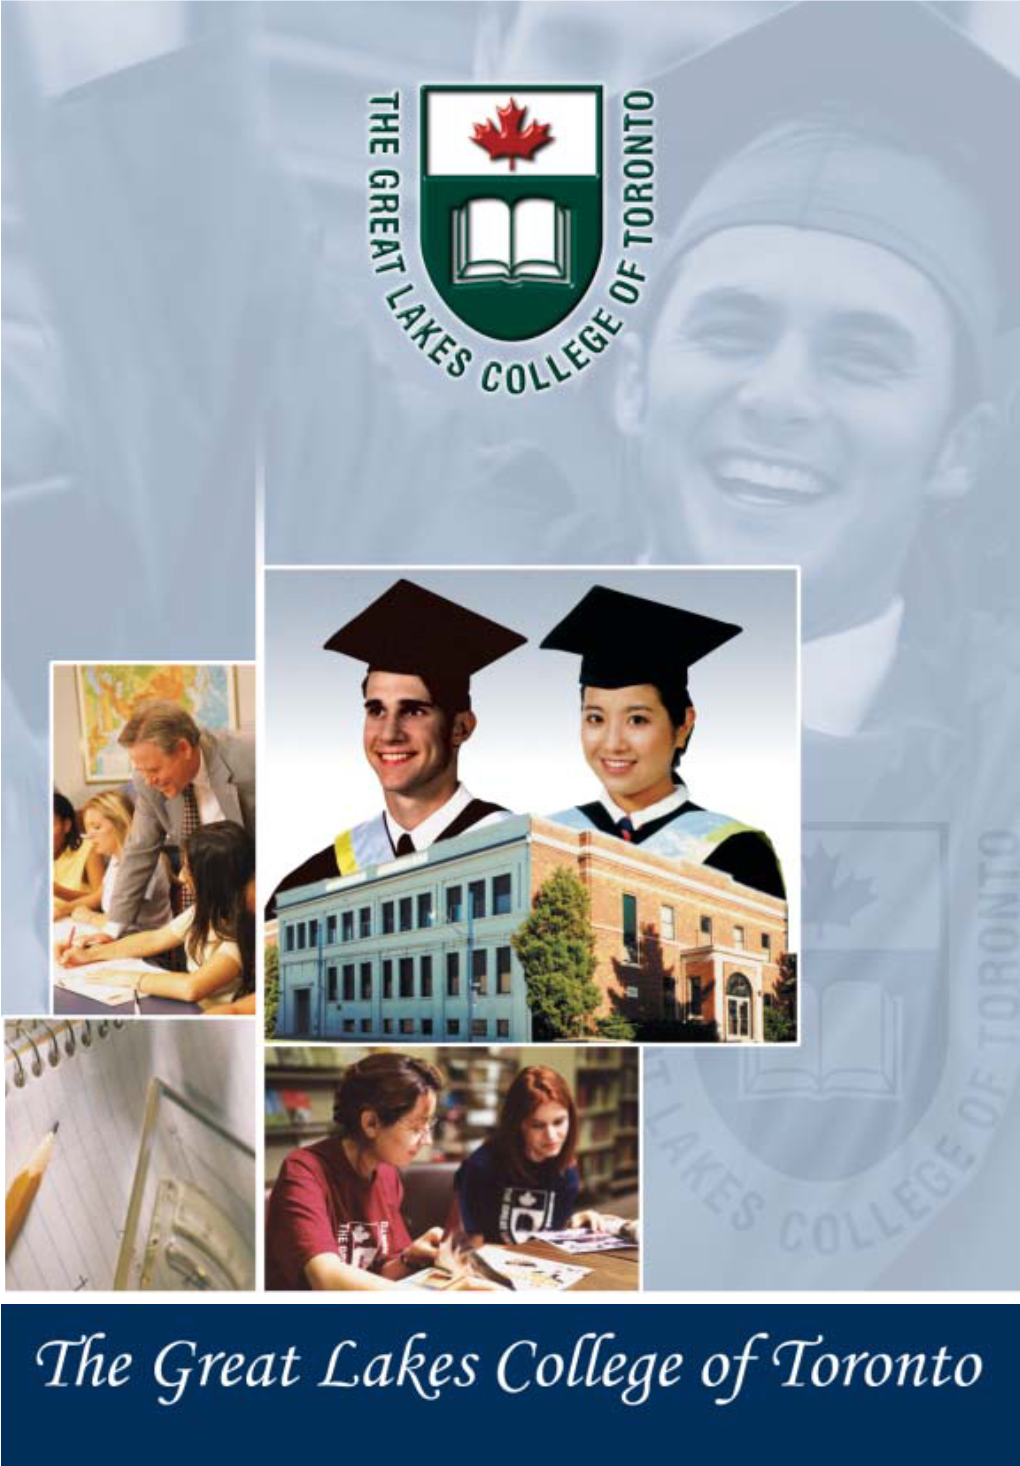 The Great Lakes College of Toronto Is a Private International School Preparing Students for Entrance Into Canadian and American Universities